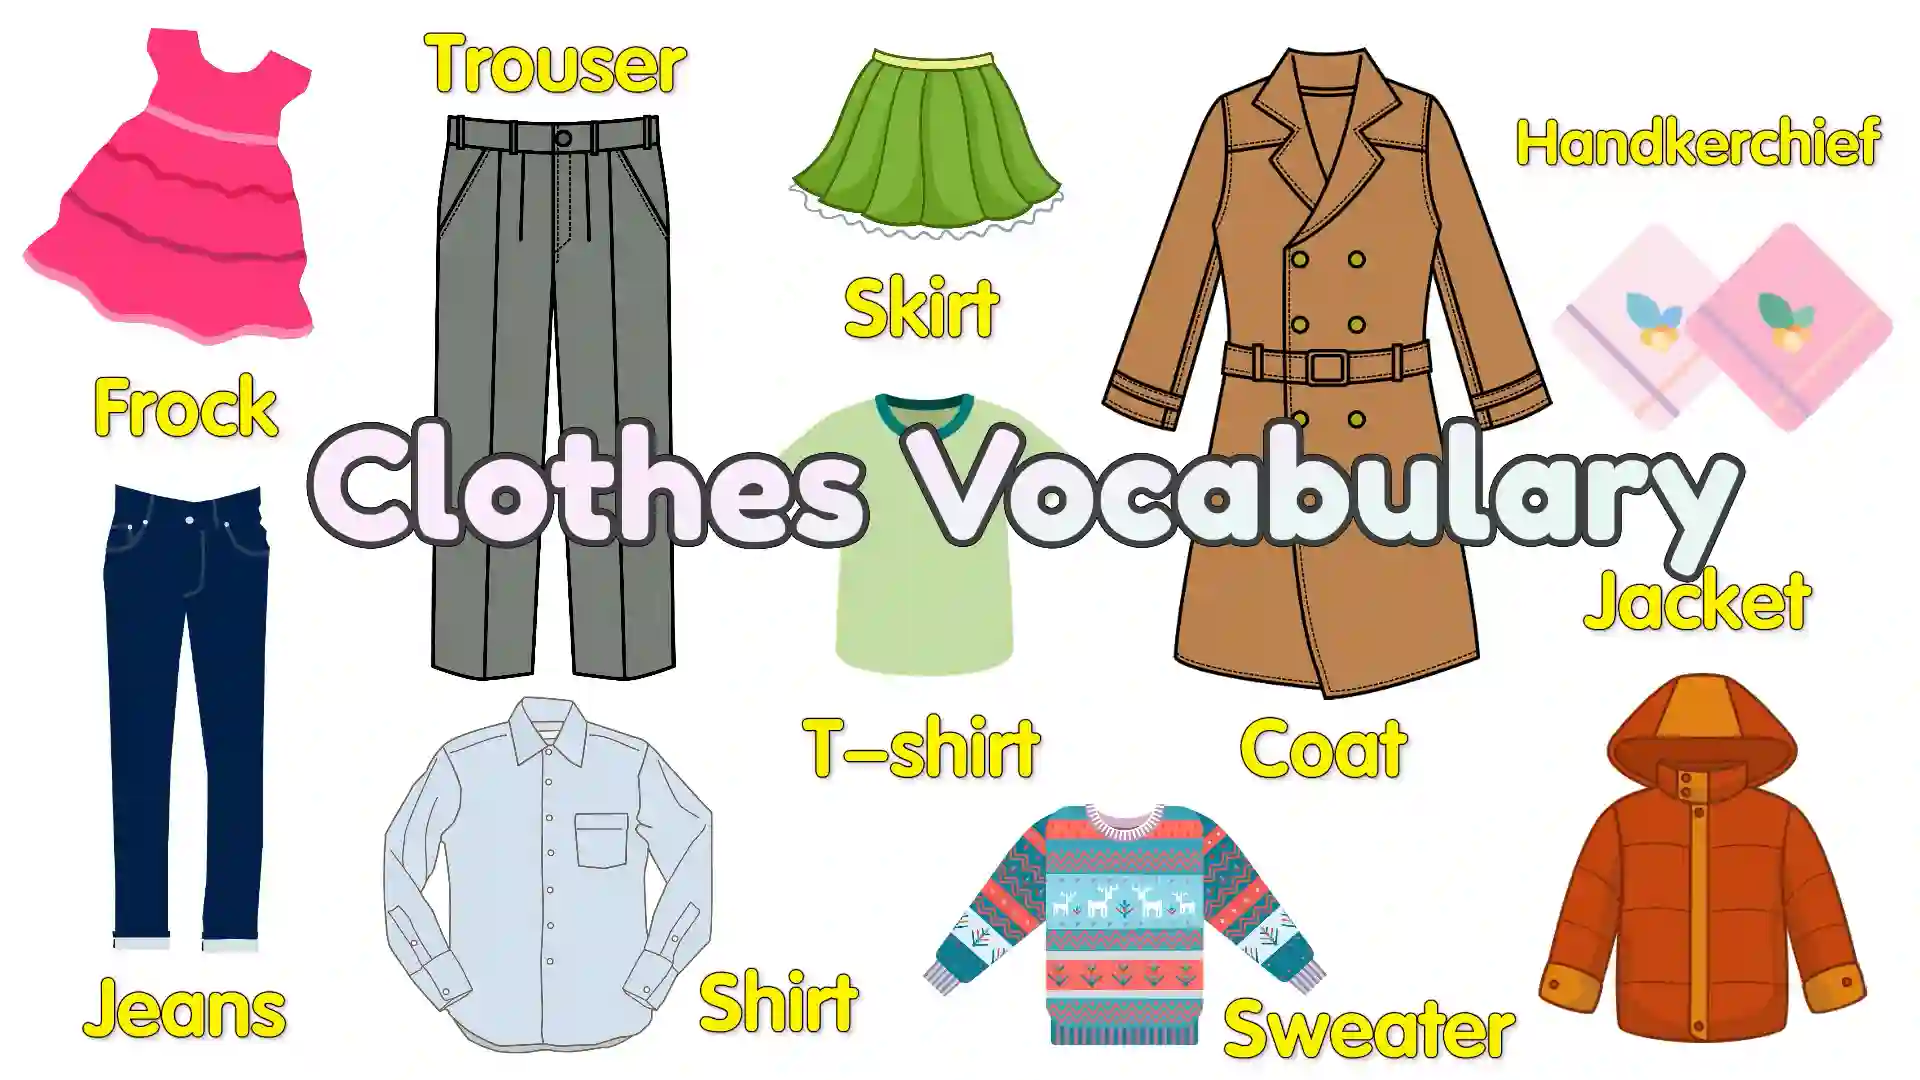 Clothes vocabulary with images - AAtoons Kids